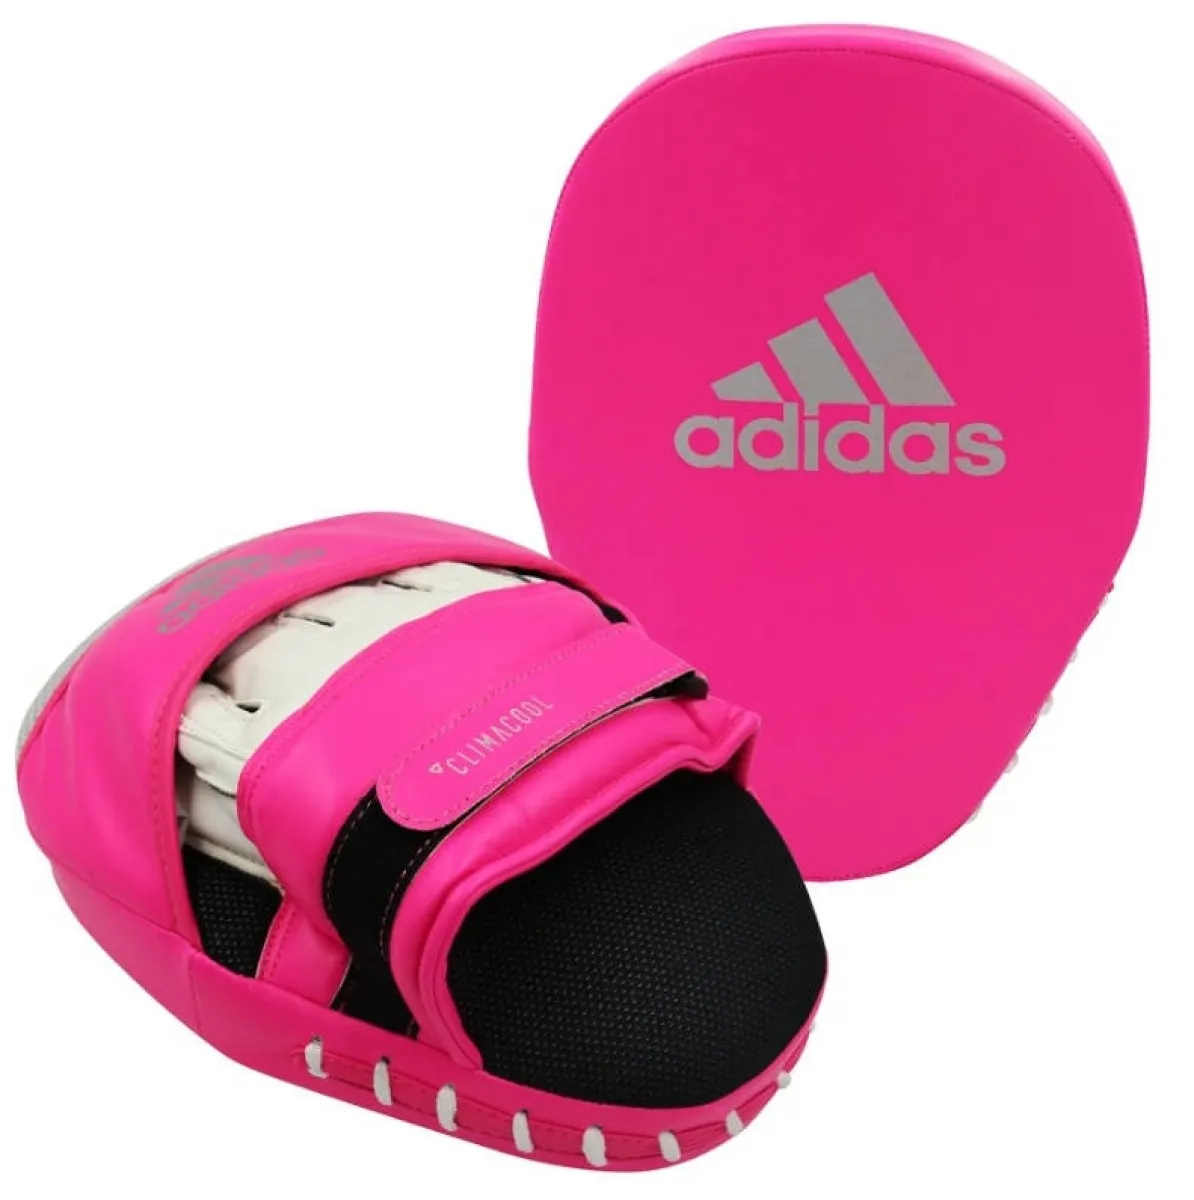 adidas hand claw Focus short curved pink